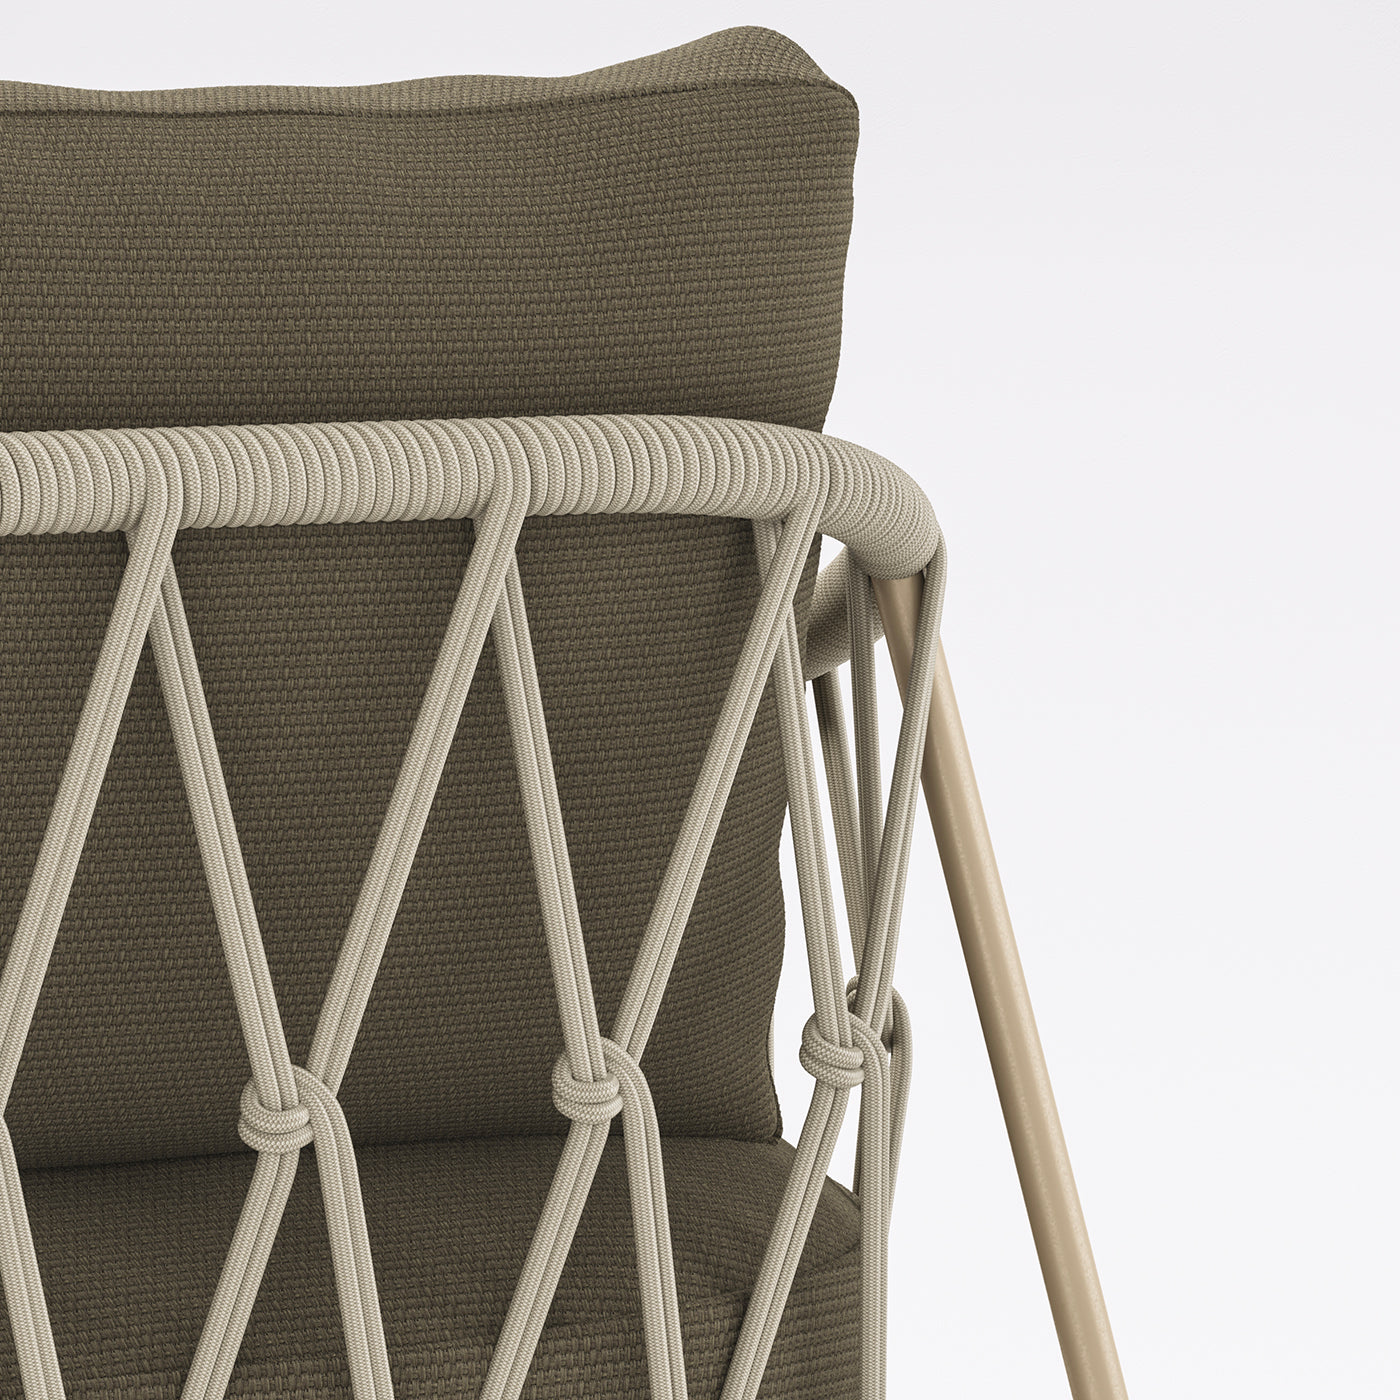 Scala Large Beige Outdoor Armchair by Marco Piva - Alternative view 1